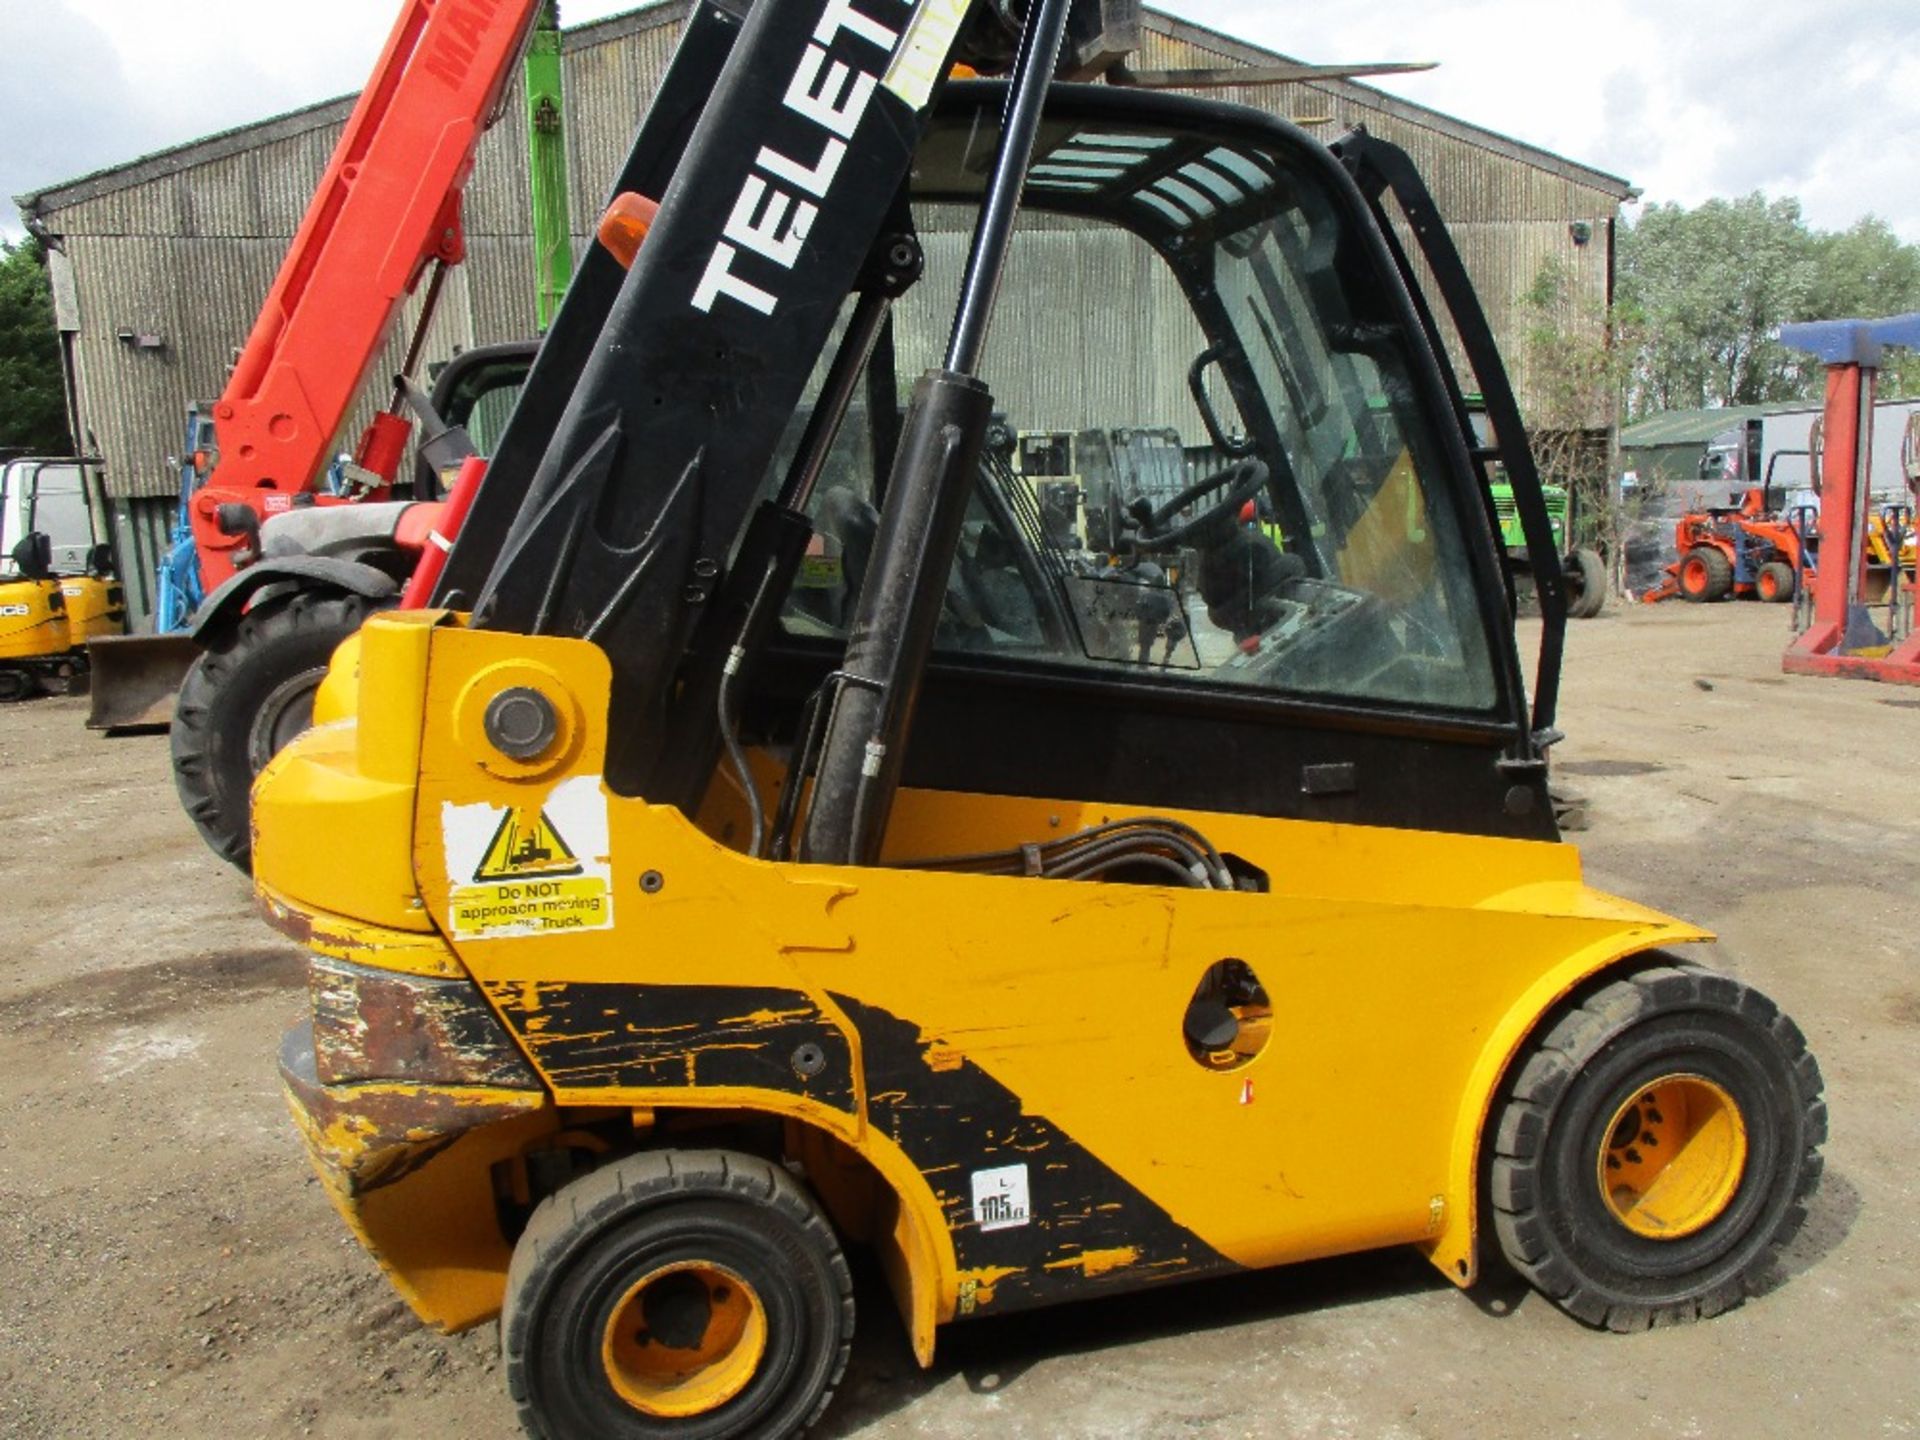 JCB TLT30 TELETRUCK 2WD YEAR 2007 SN:972569N 8291 REC HRS WHEN TESTED WAS SEEN TO DRIVE, STEER, LIFT